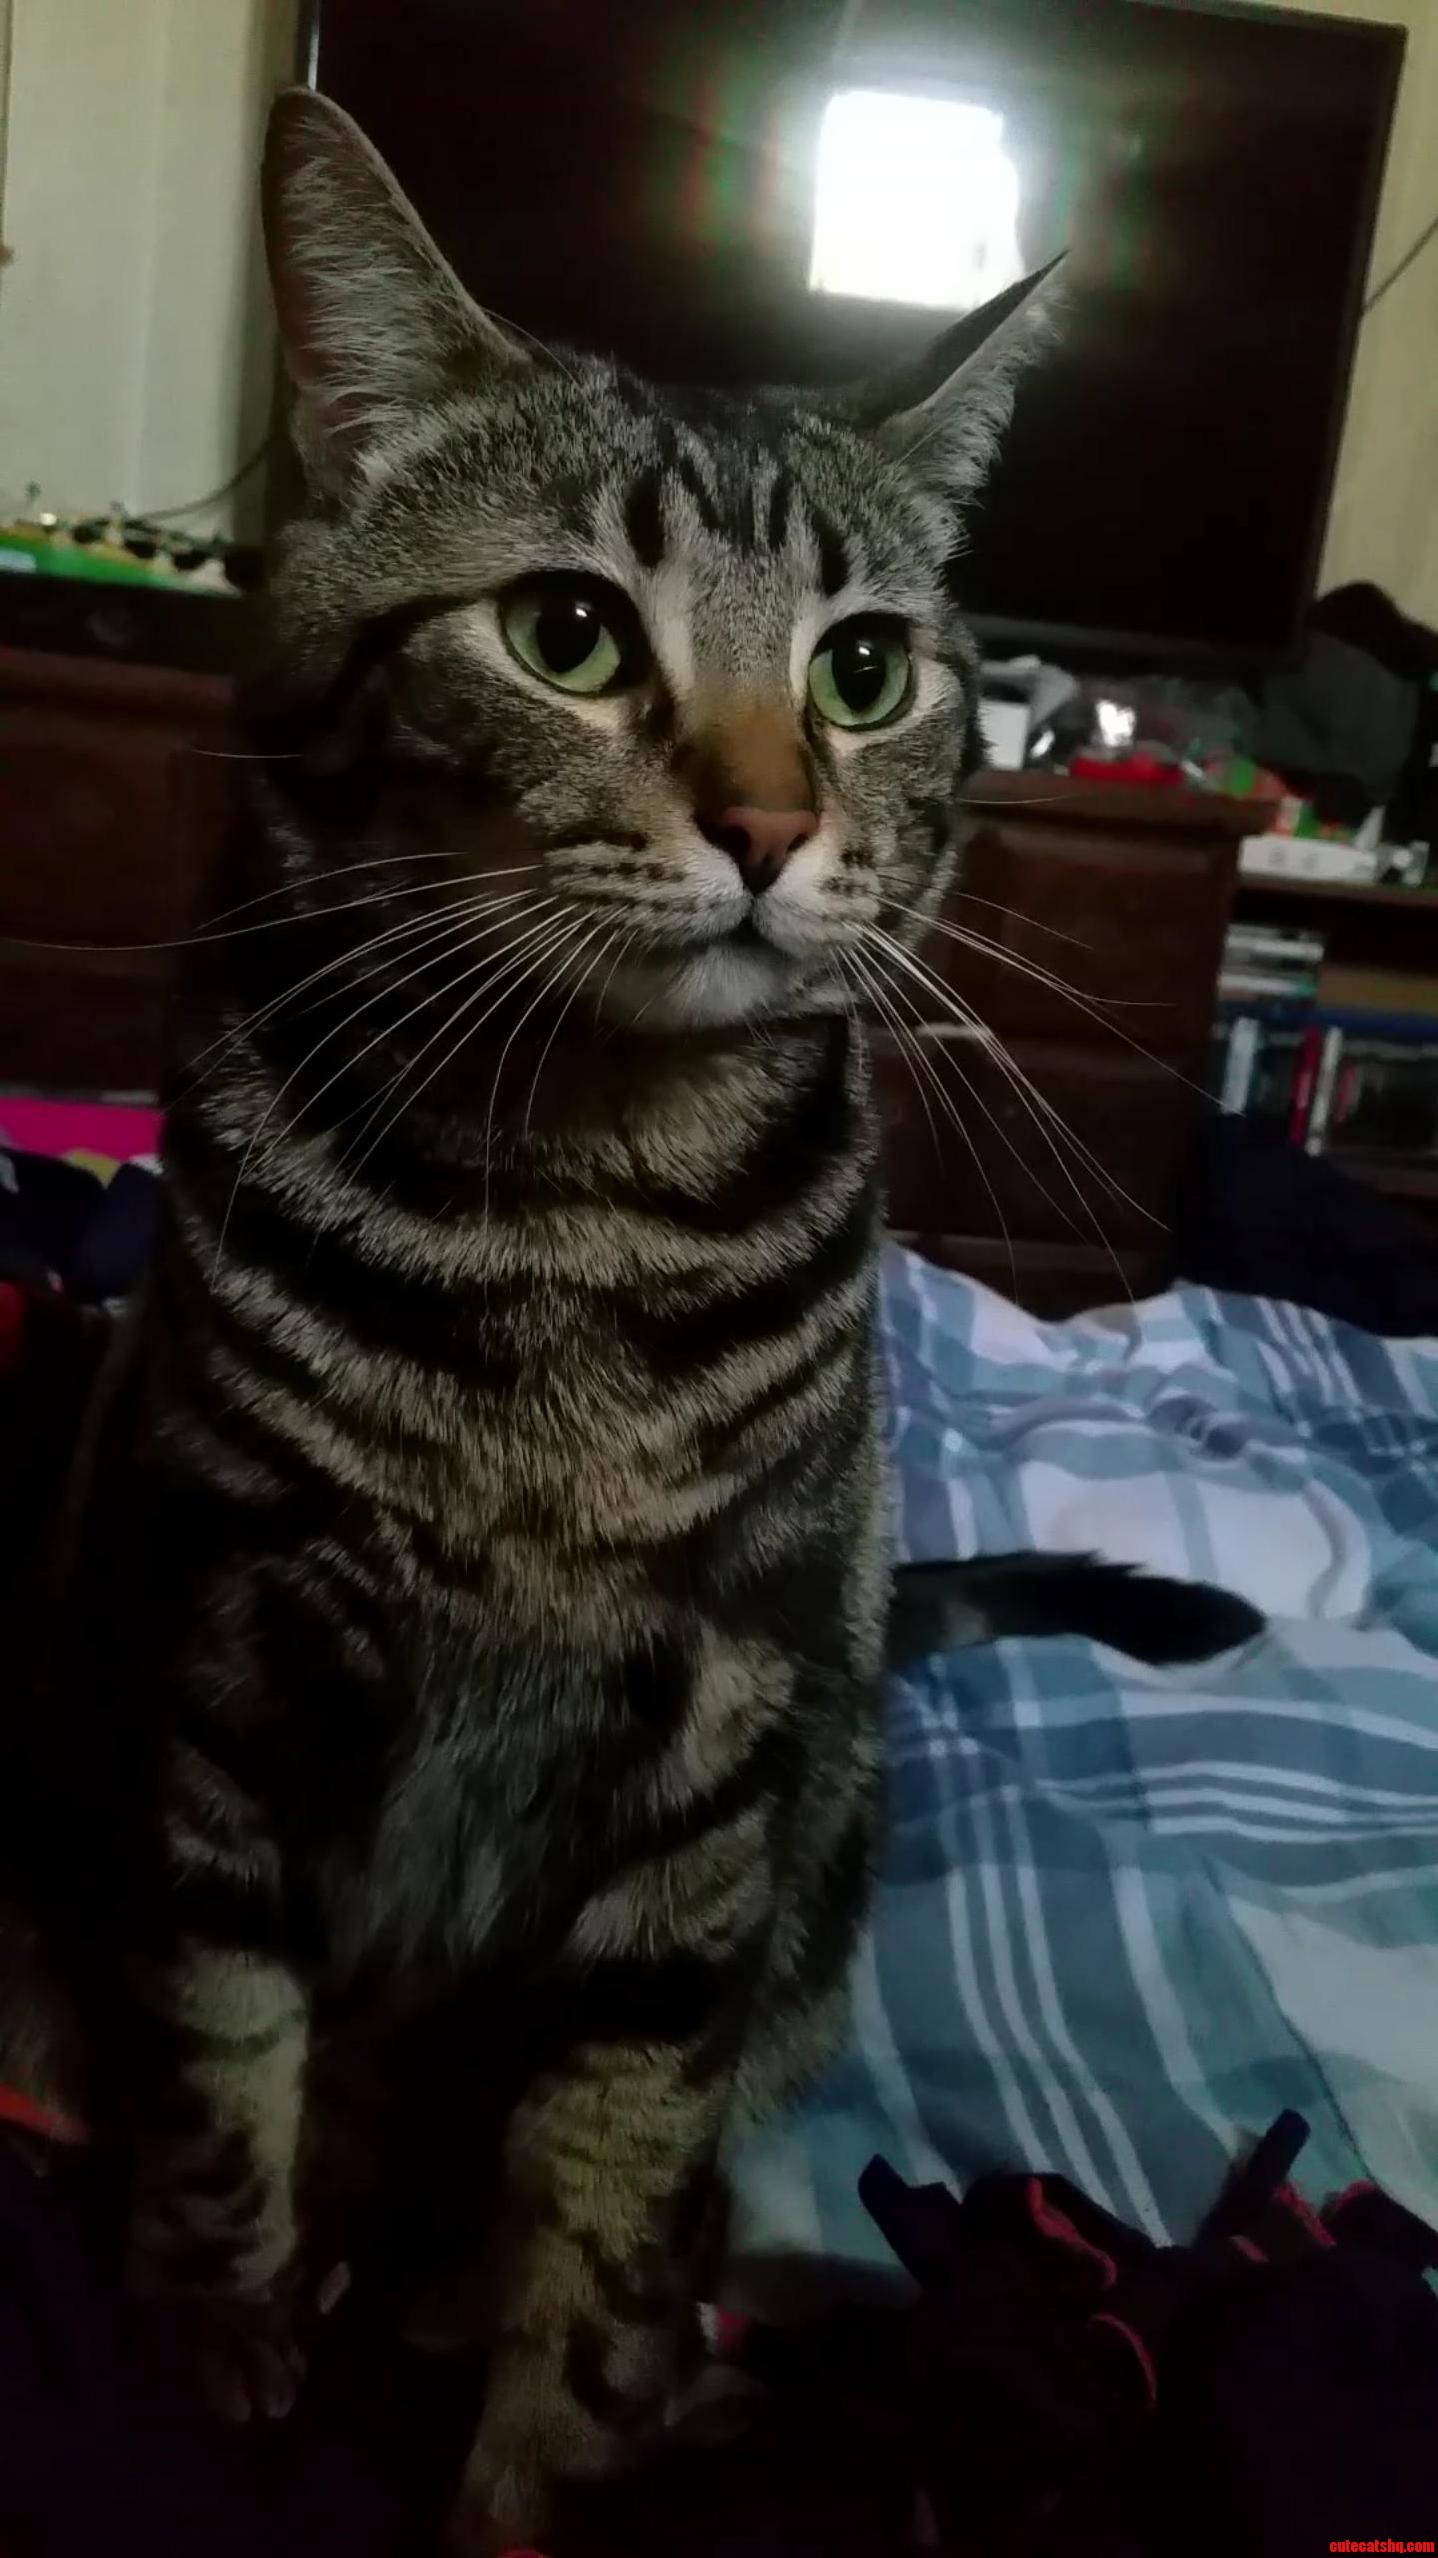 Thought this was a good snapshot of a video of gimli. deep in kitty thought.